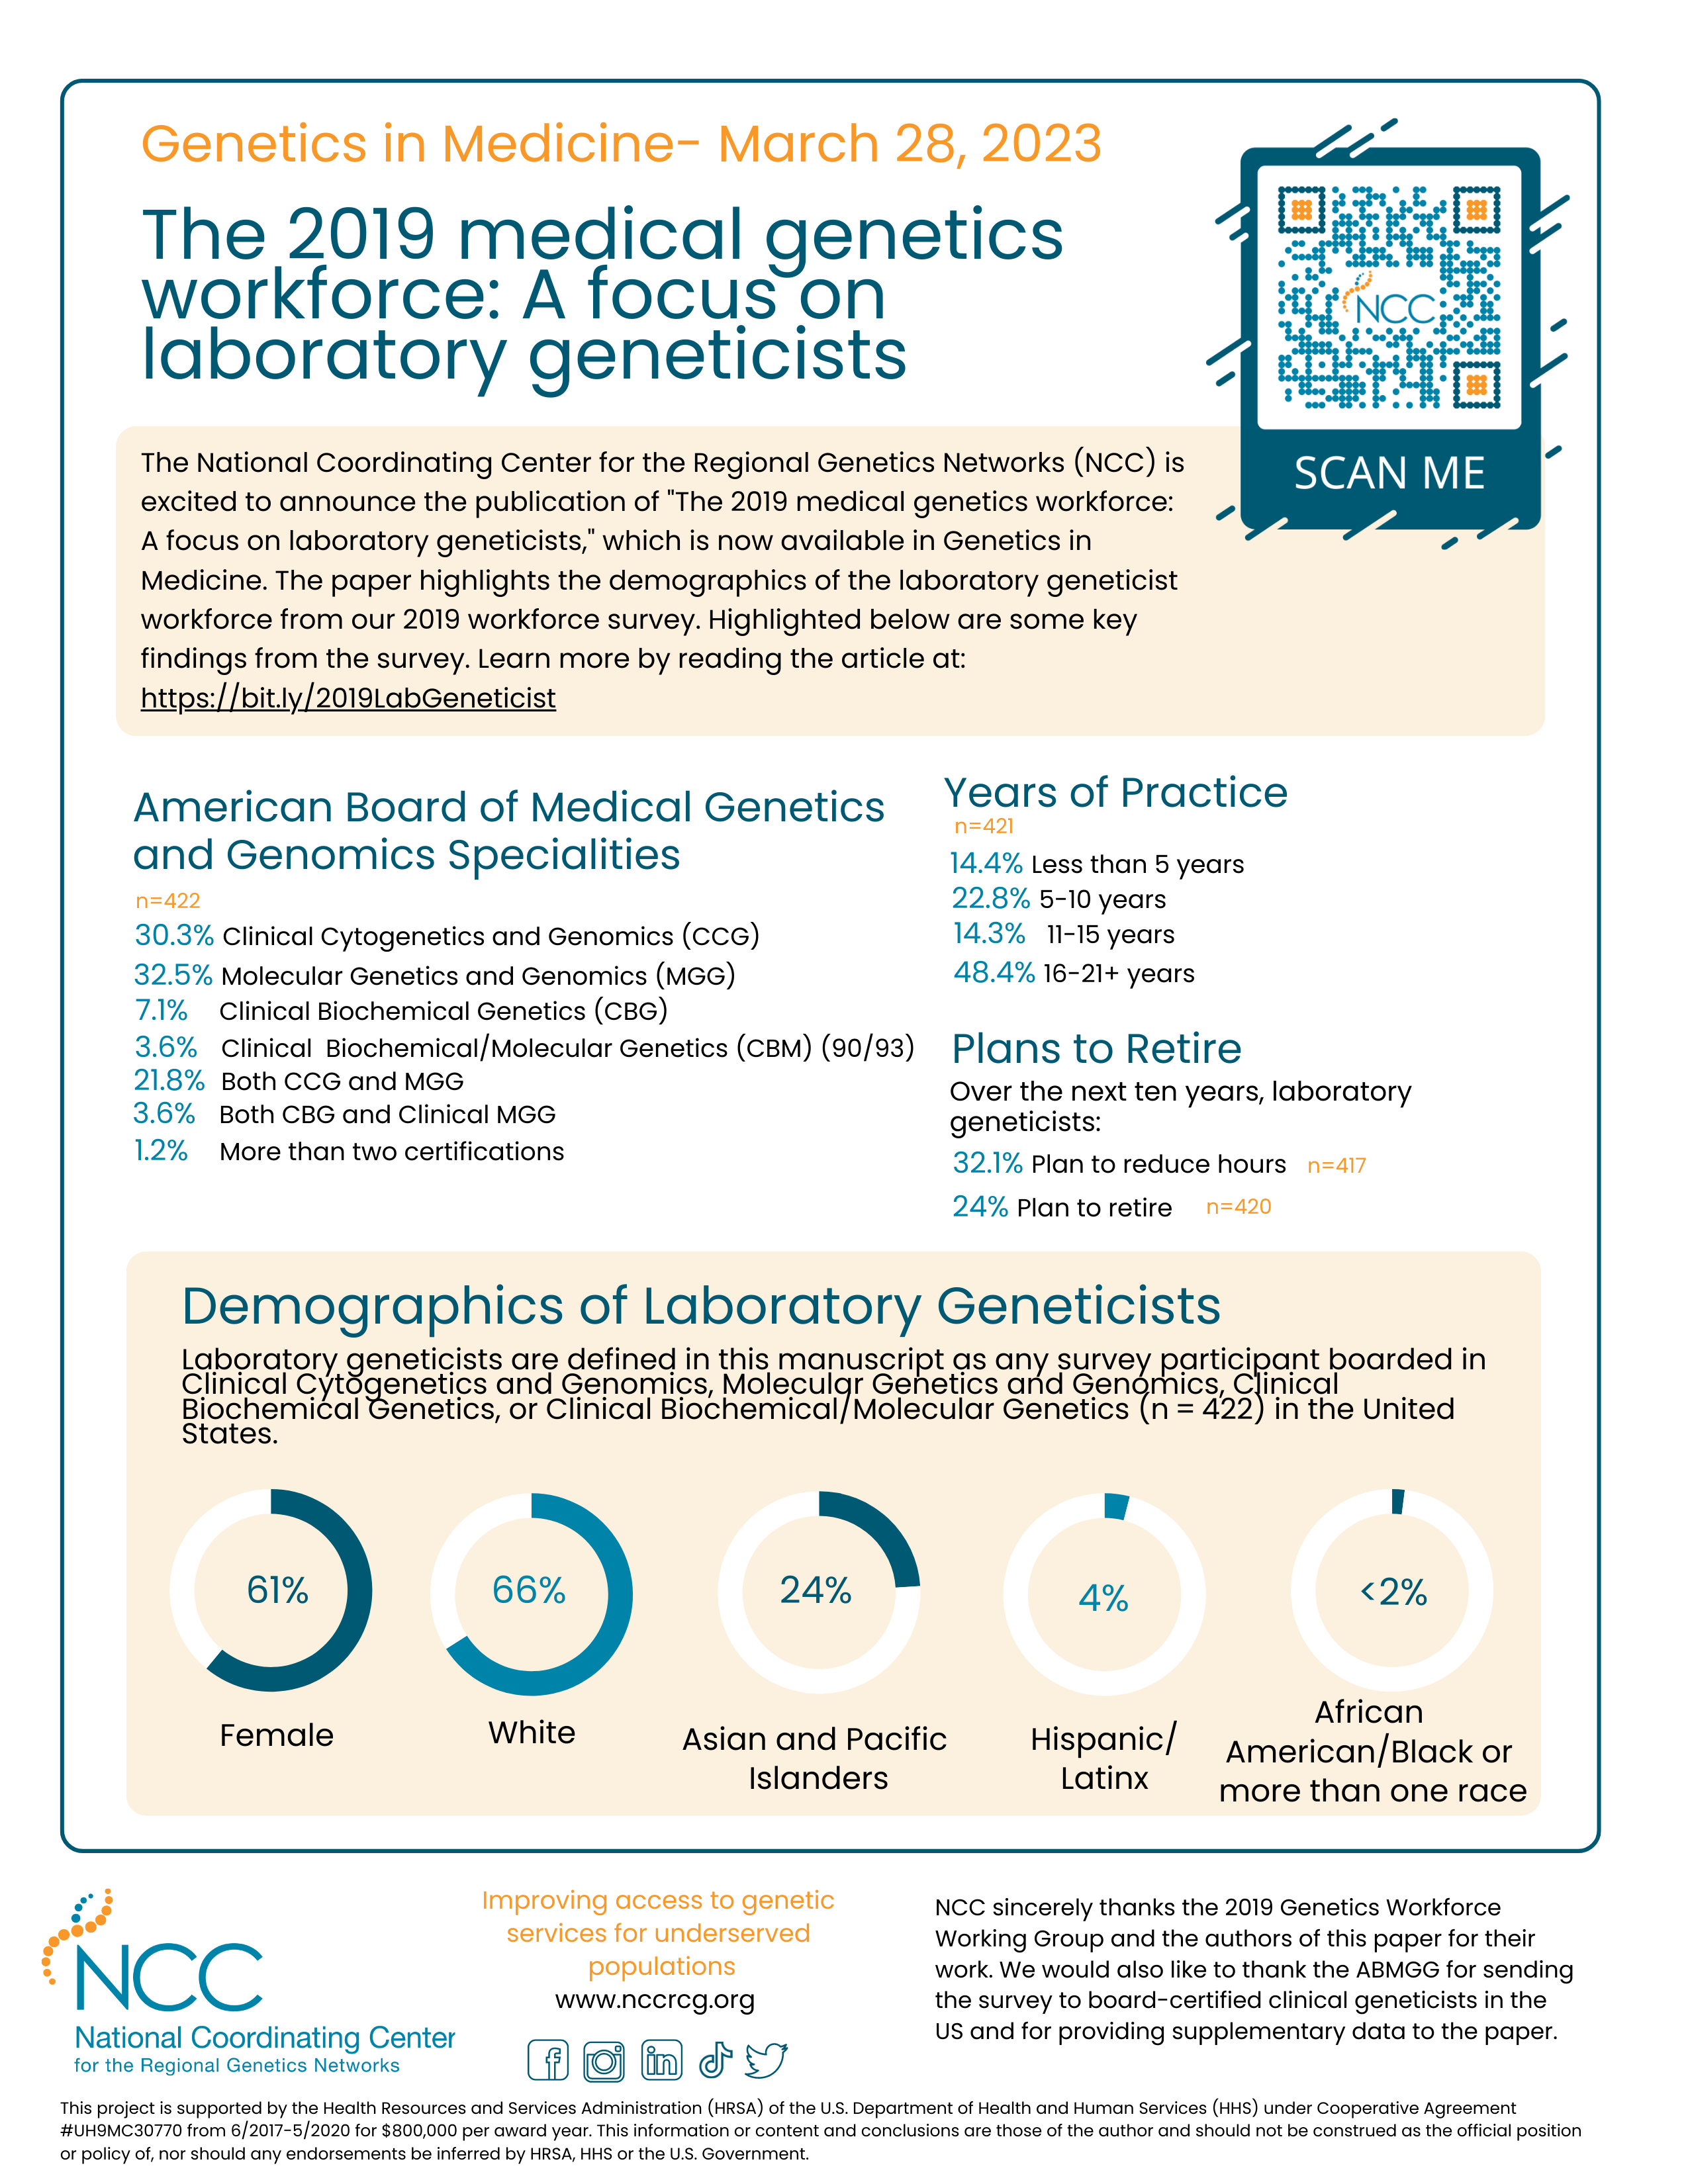 Infographic about the 2019 US medical genetics workforce: a focus on clinical genetics